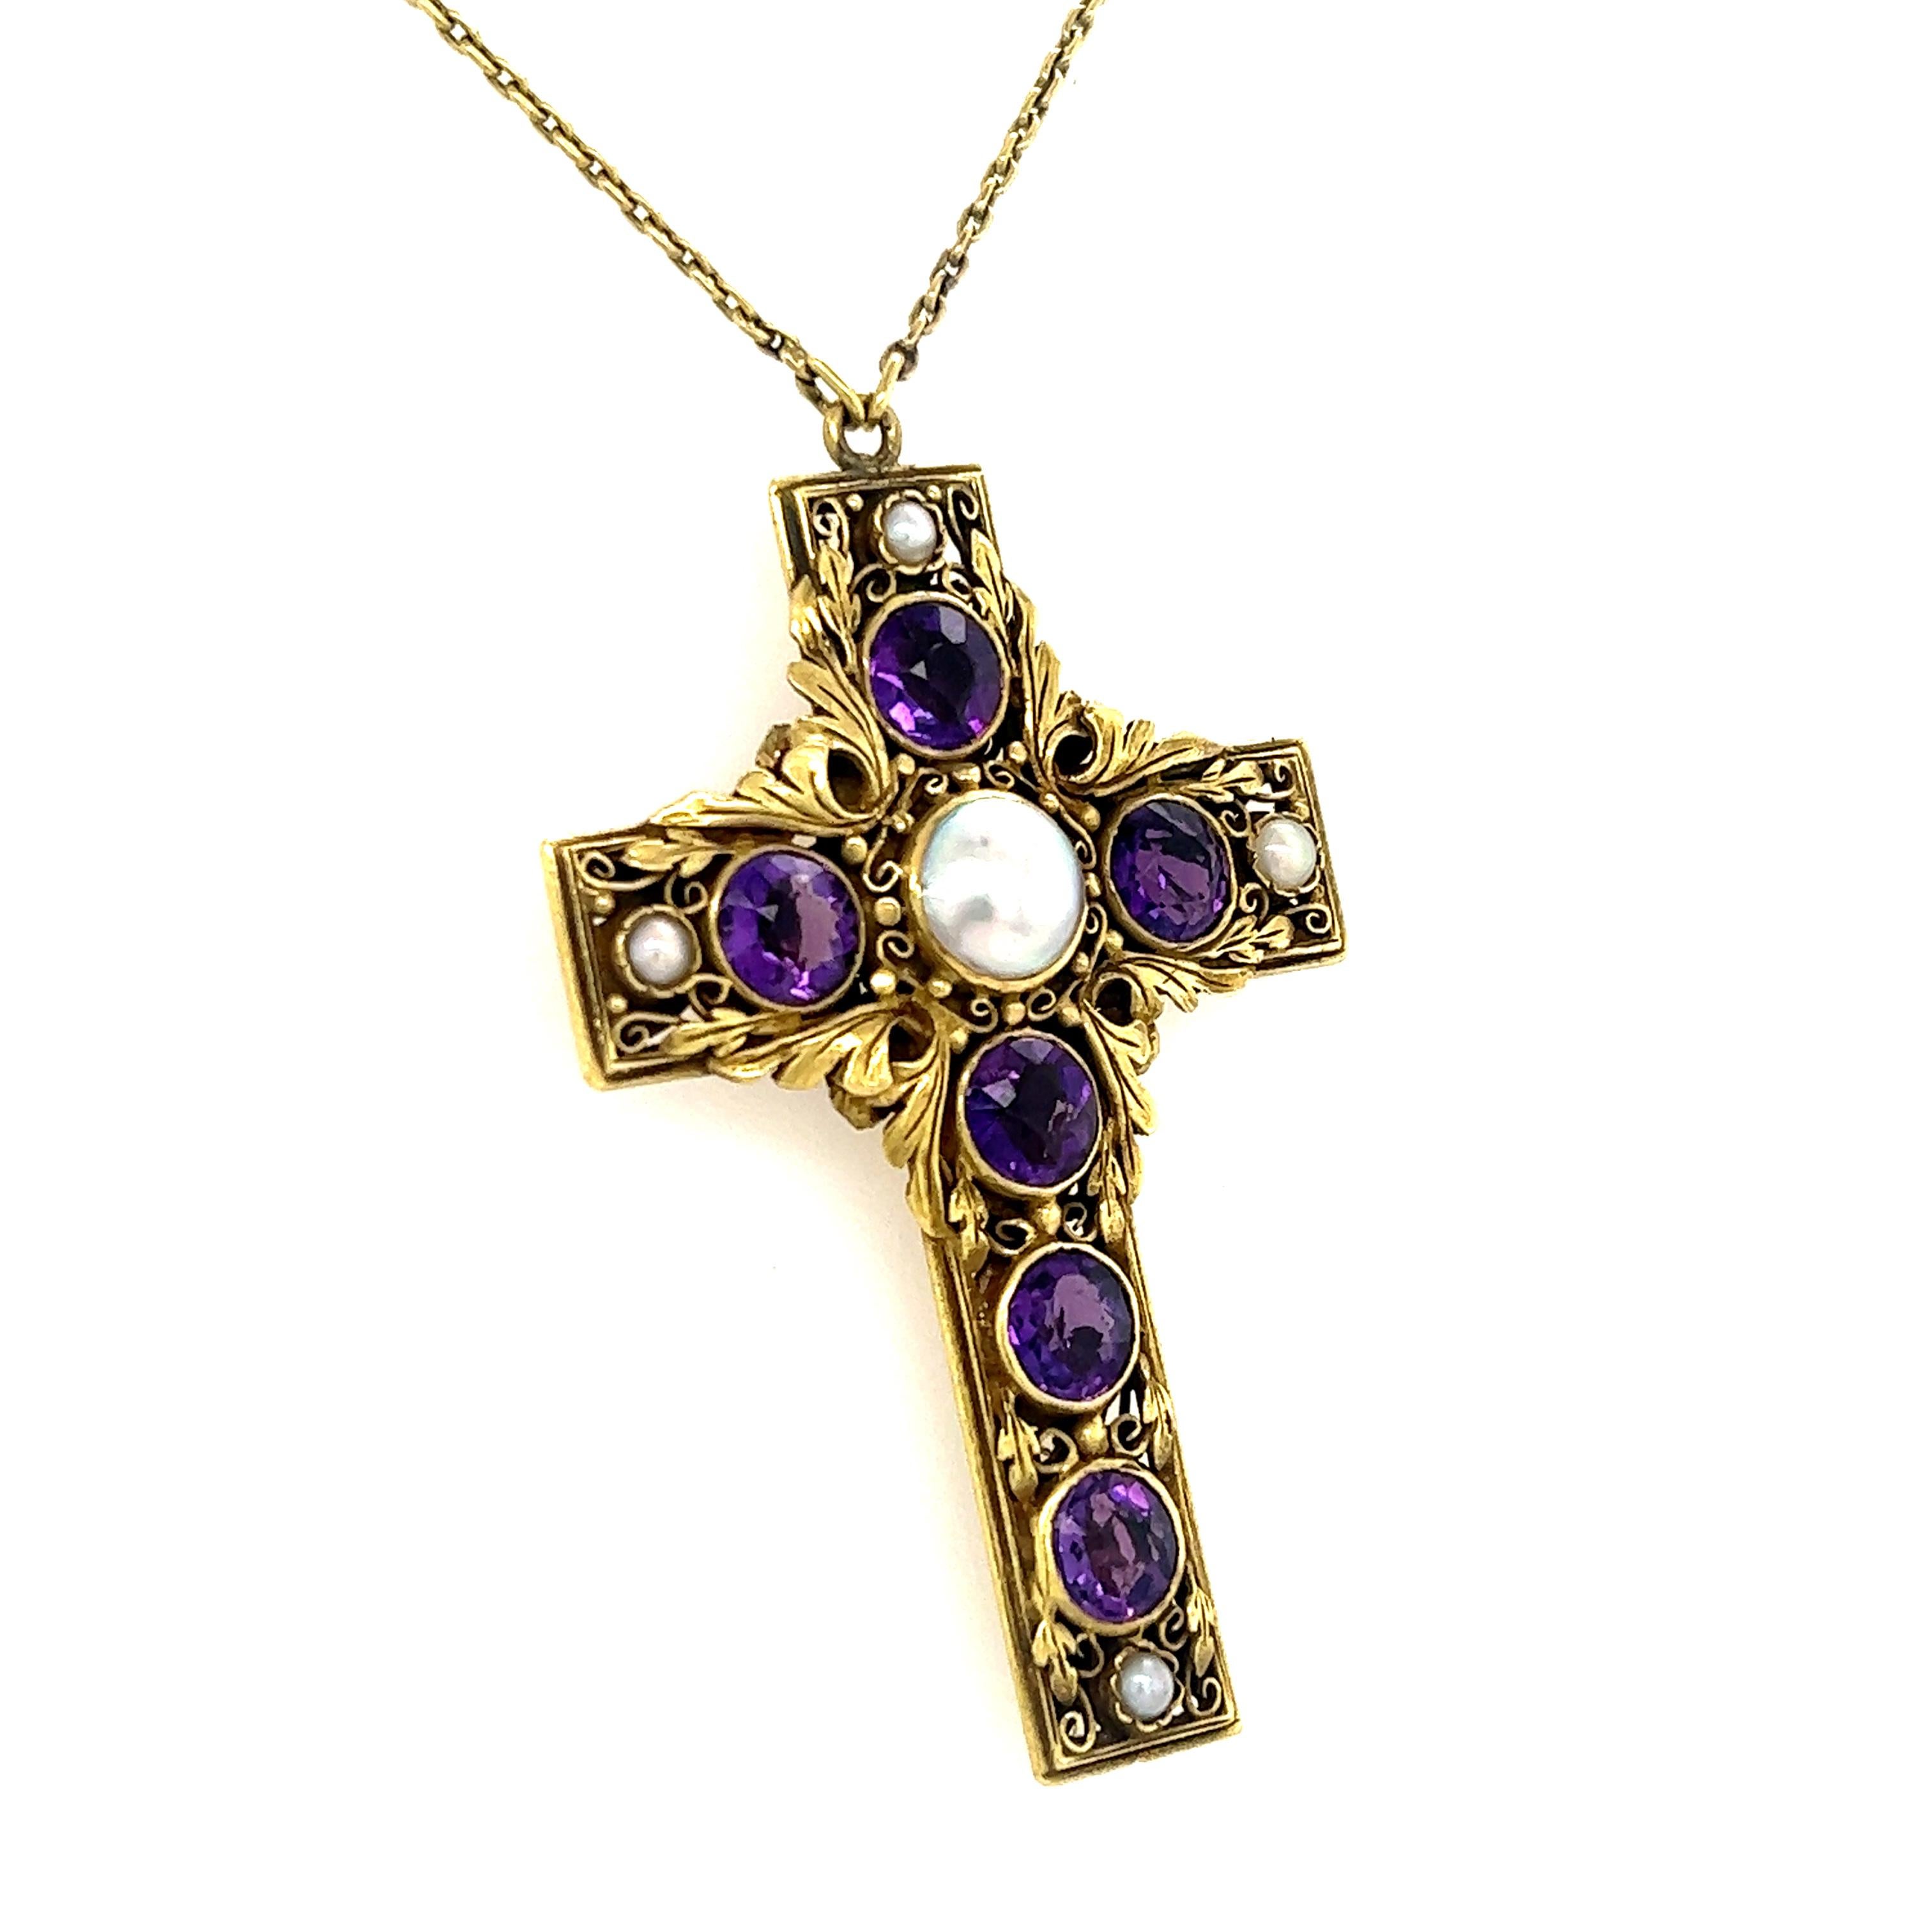 A truly exceptional Victorian pendant and necklace. The piece is crafted in 14k yellow gold and showcases natural amethyst gemstones and natural pearl gemstones. The pendant shows details throughout as floral details are hand etched throughout the